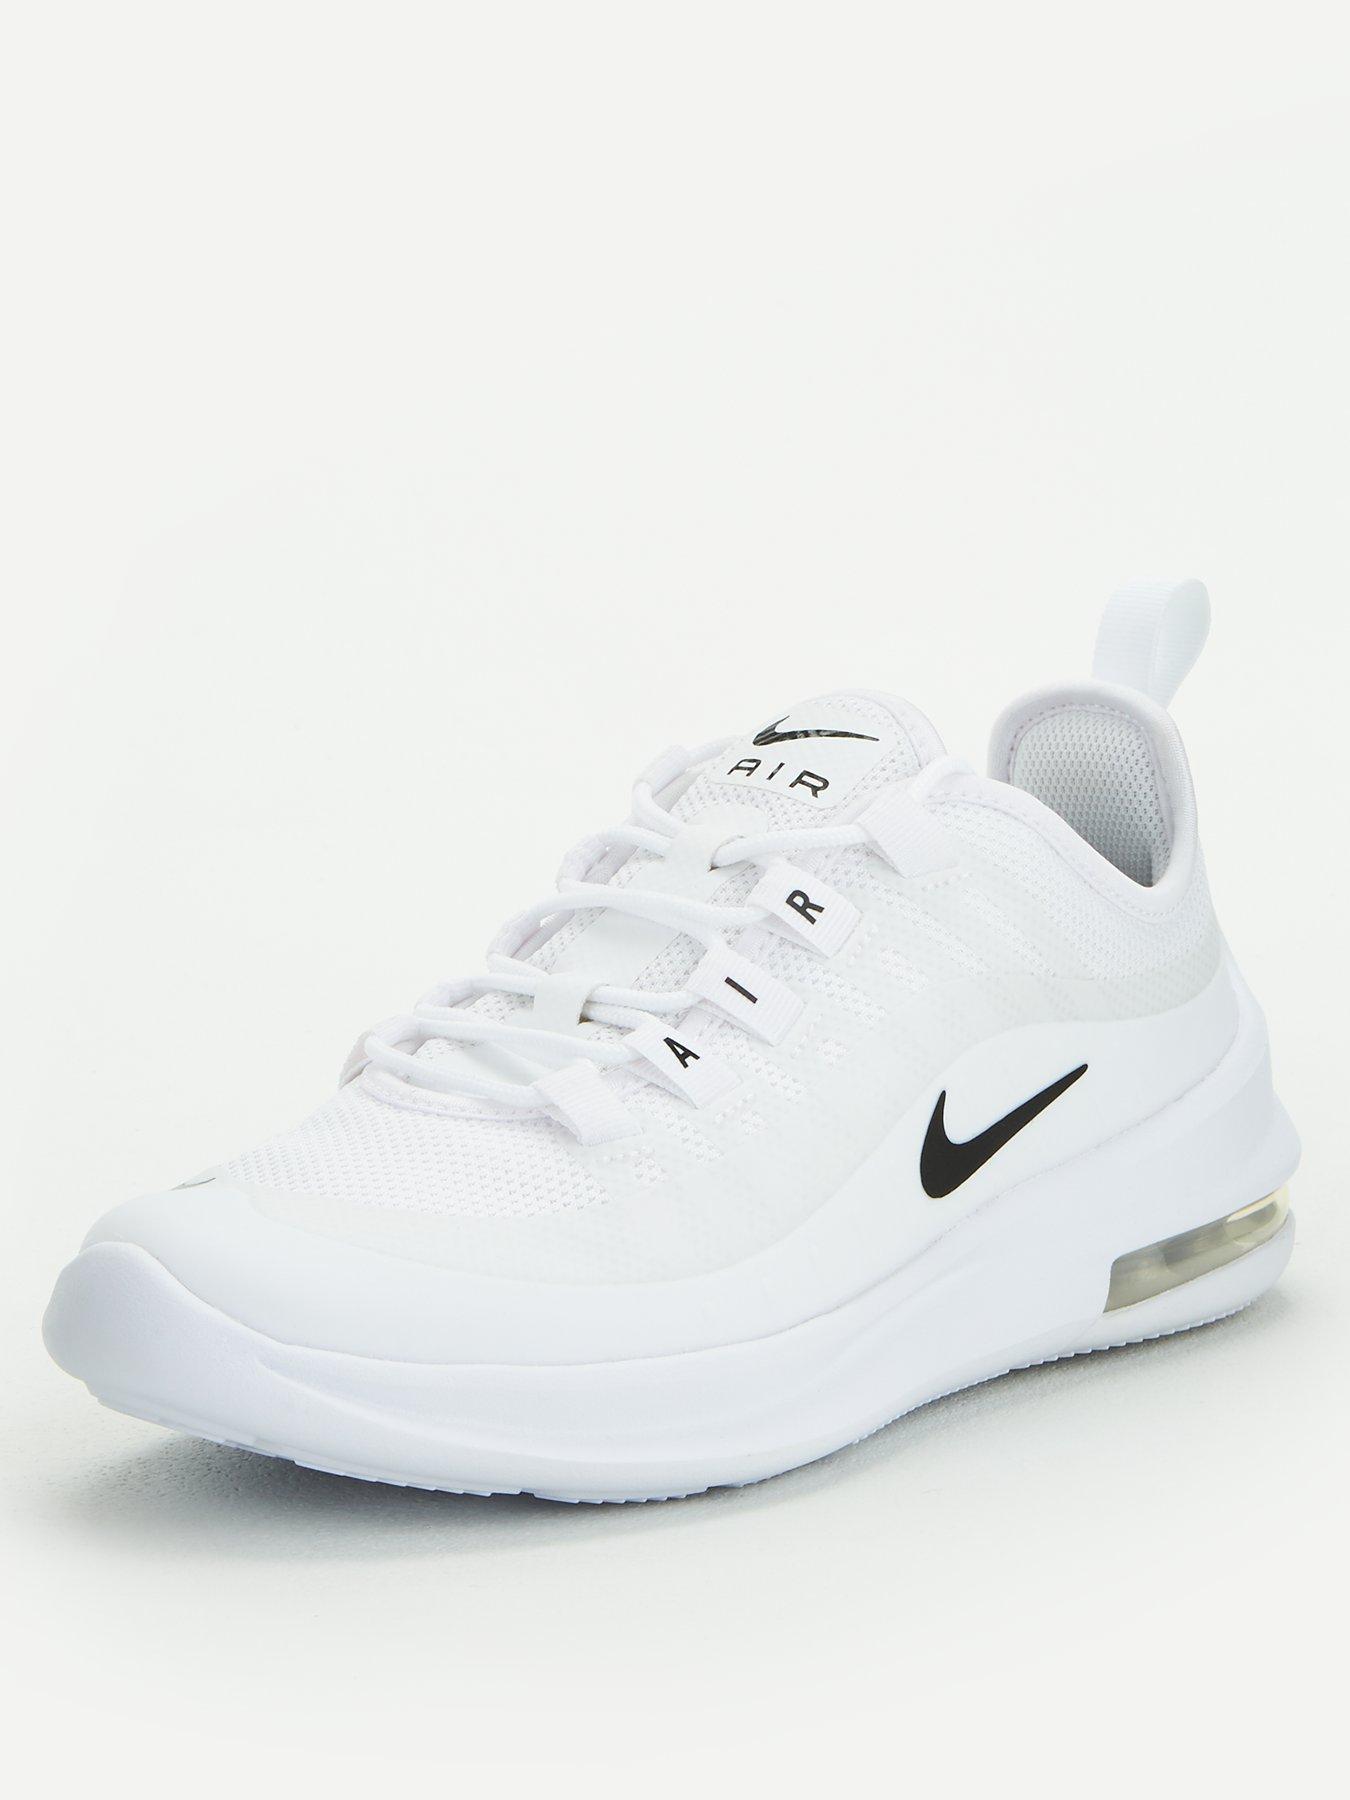 nike axis junior trainers